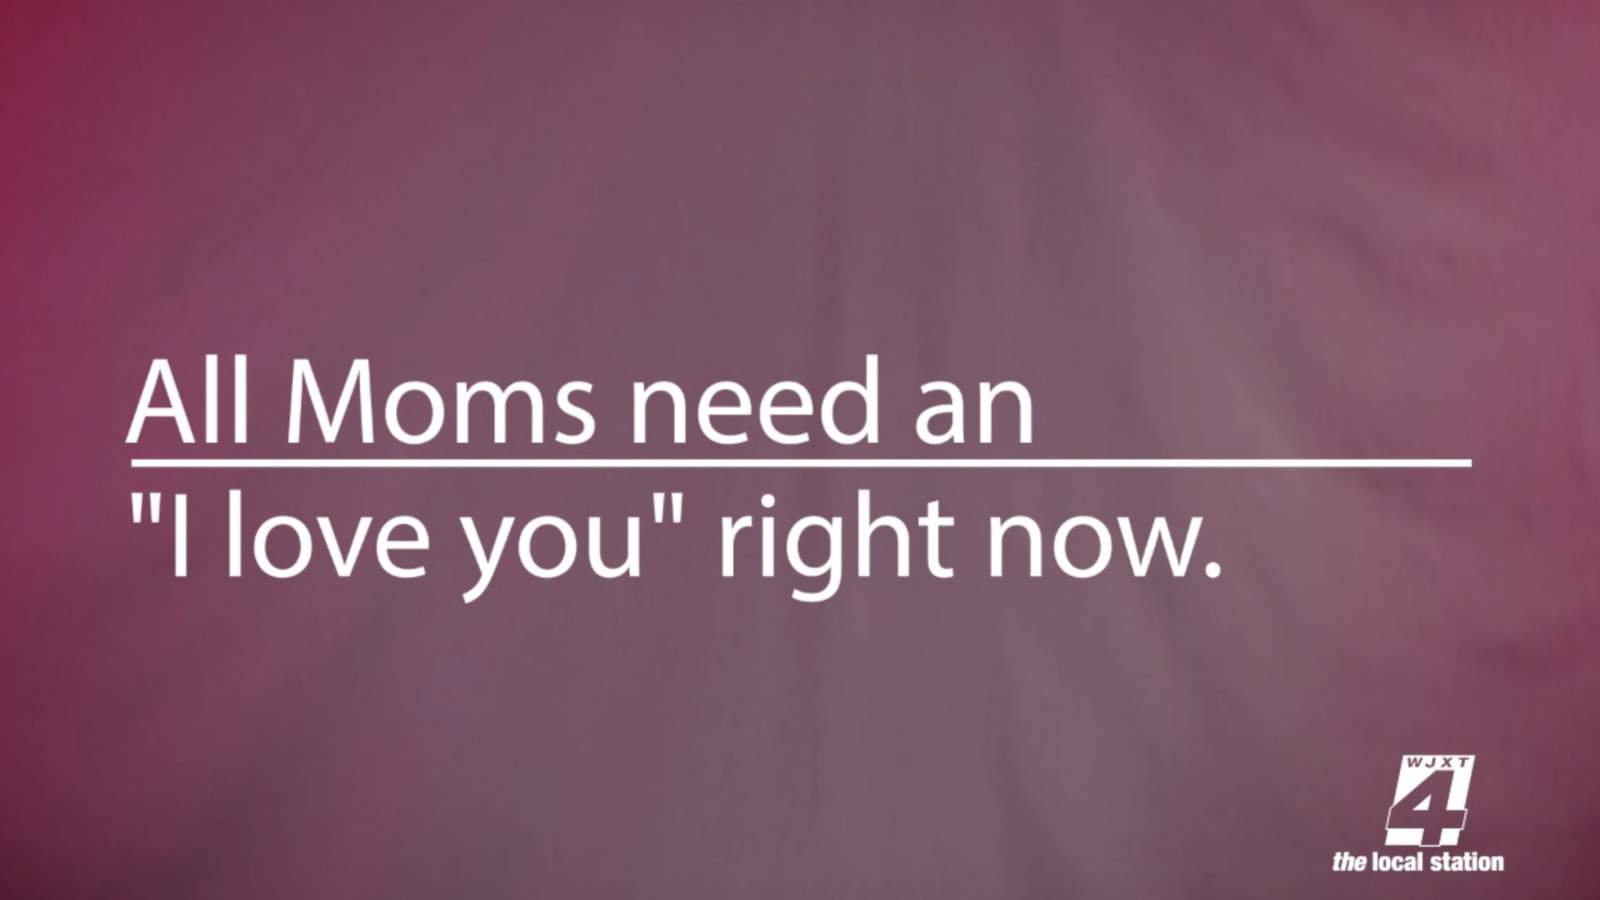 VIDEO: All moms could use an 'I love you' right now